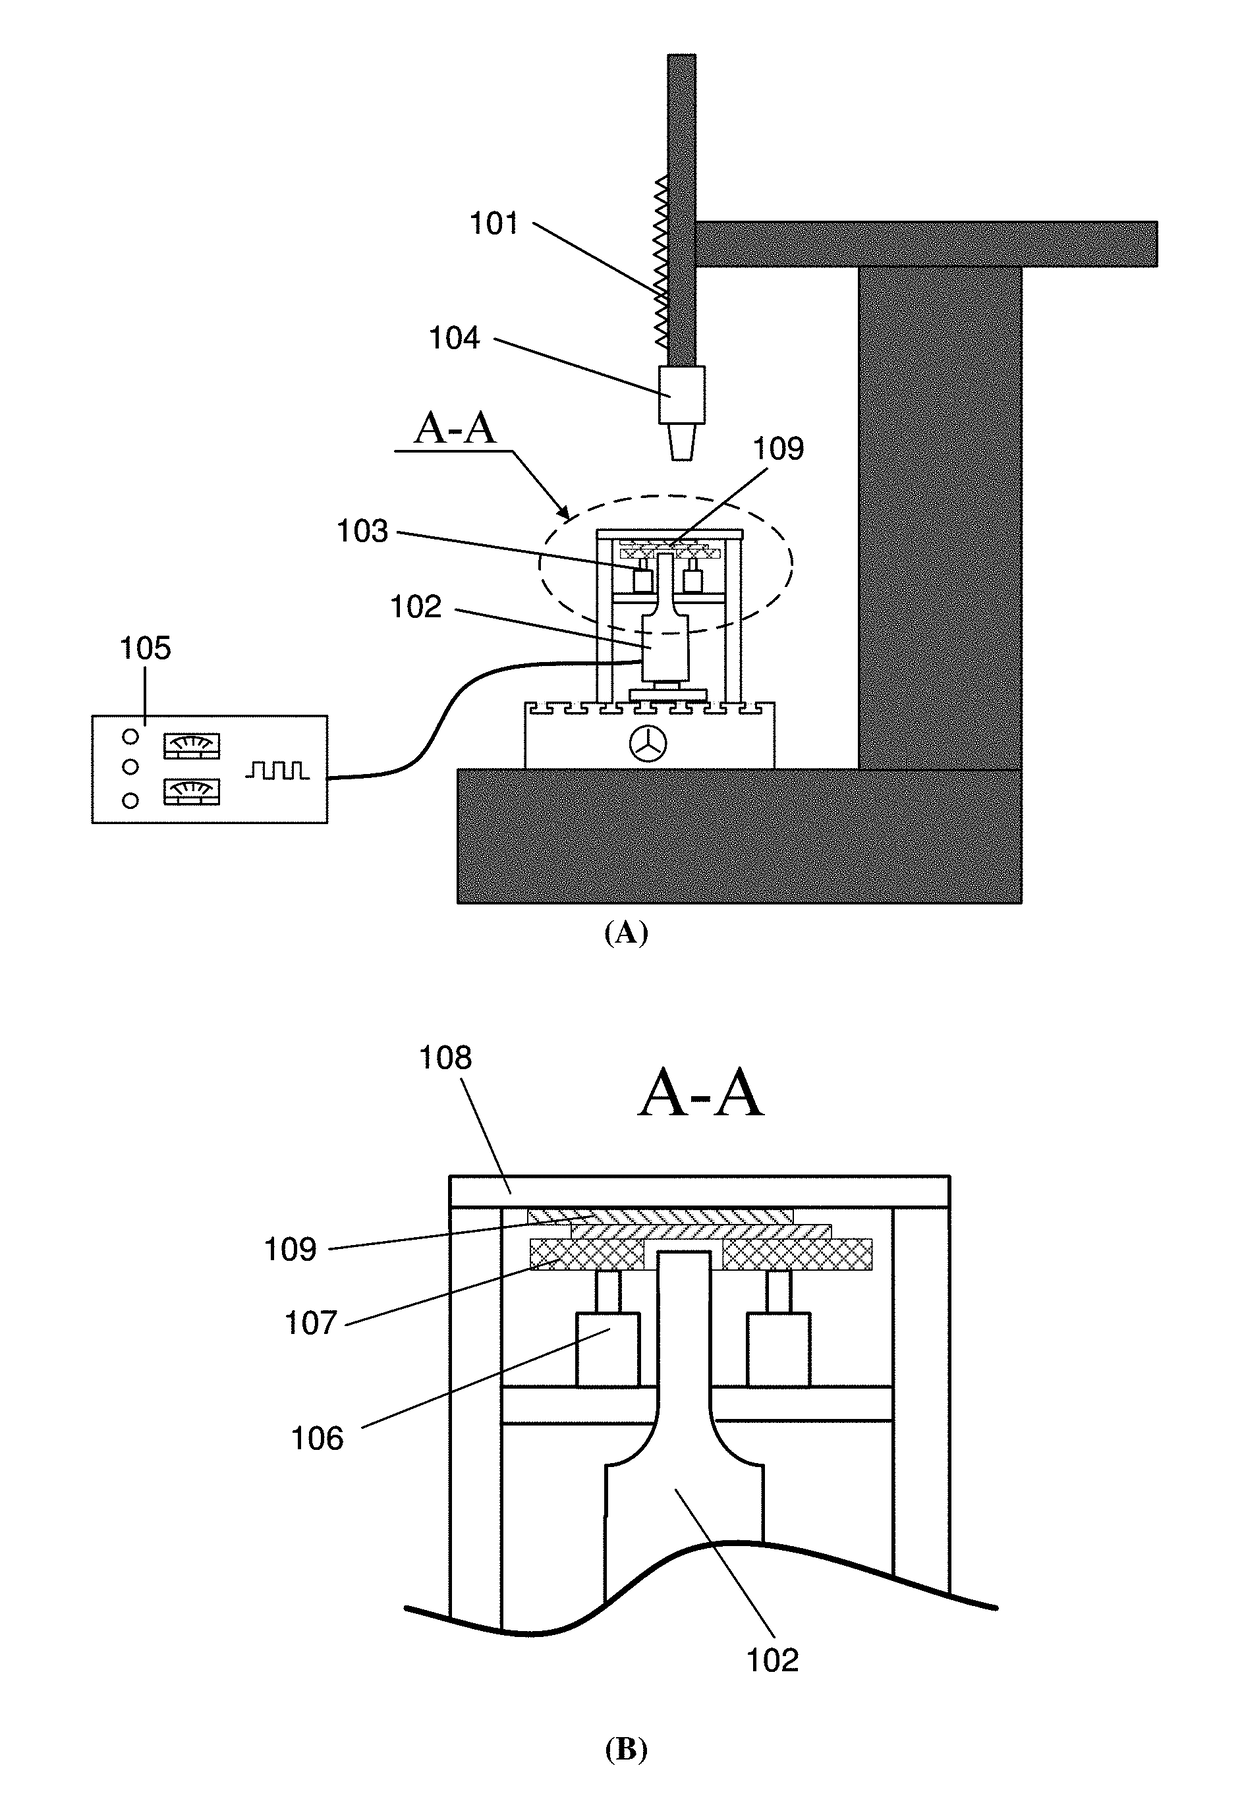 Method Of Laser Joining Of Dissimilar Materials With Ultrasonic Aid